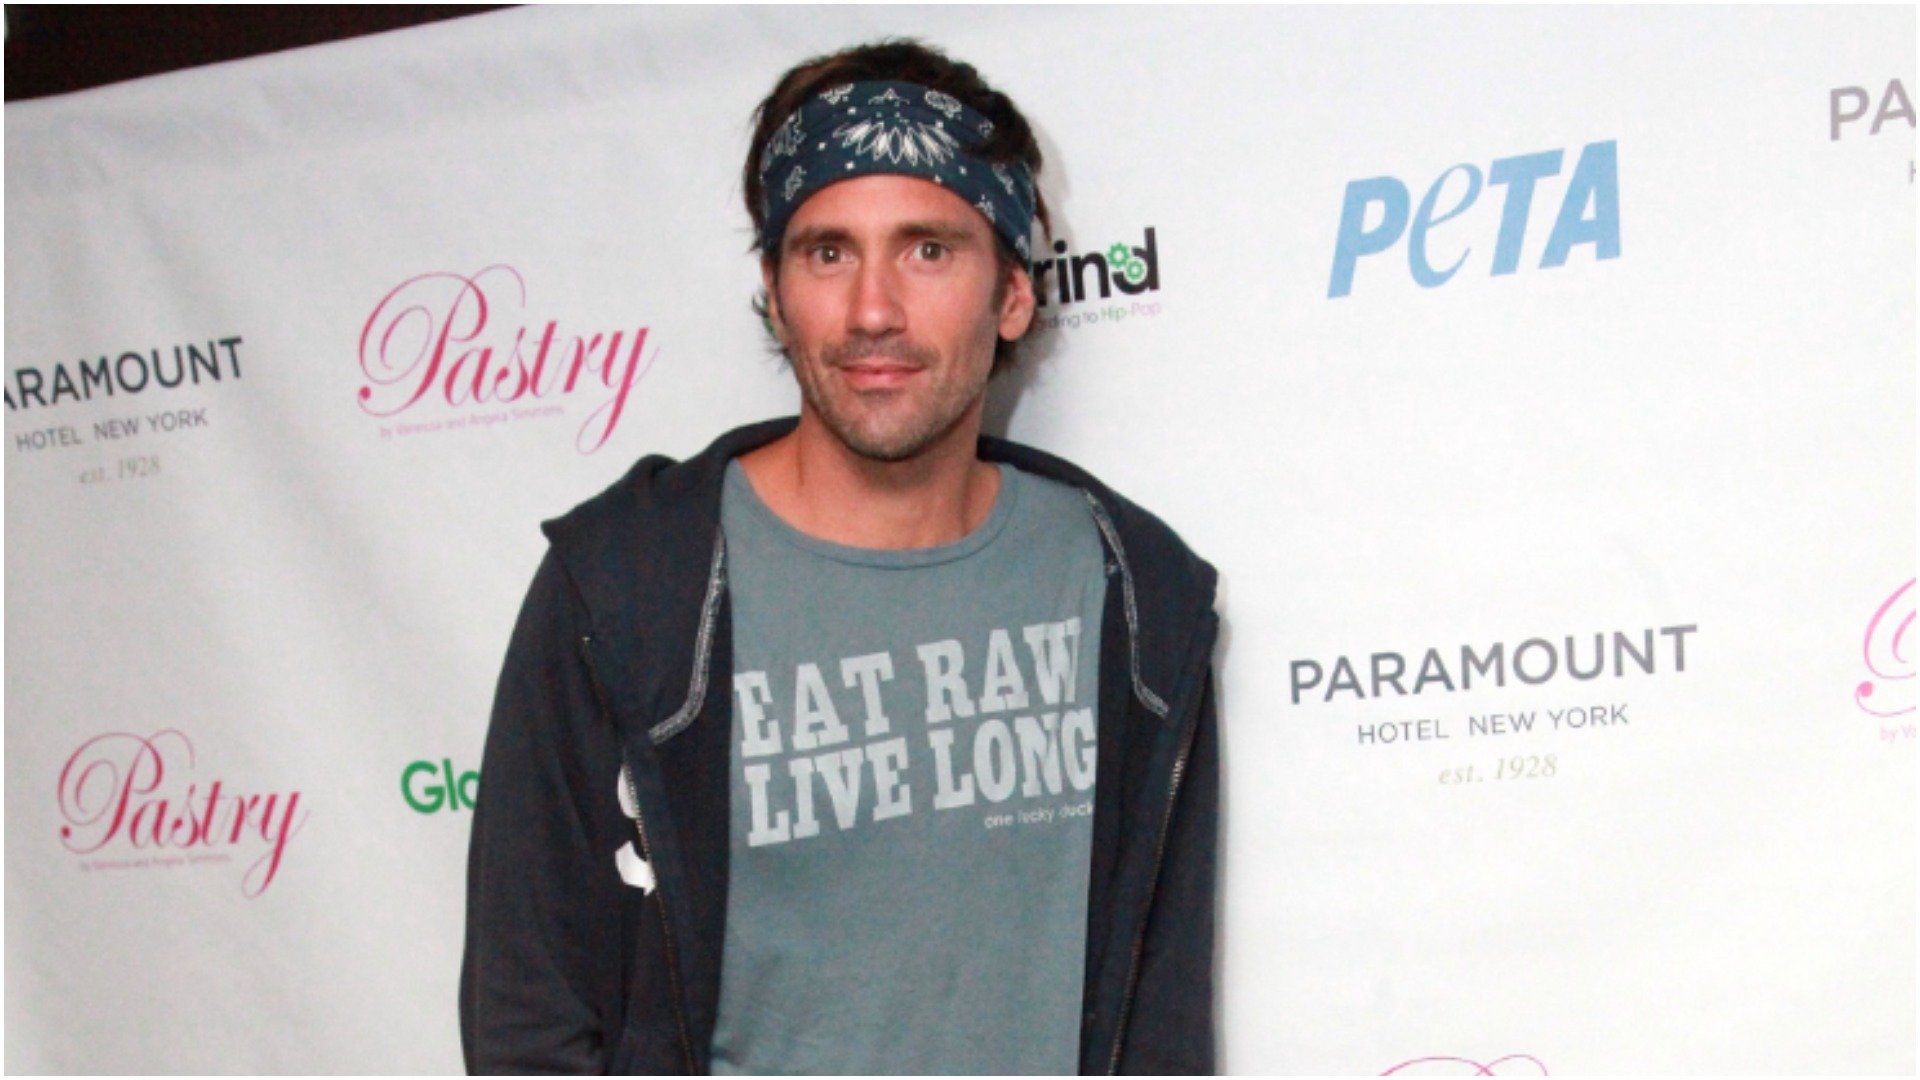 Eric Nies from The Real World: New York attends the unveiling of Angela Simmons' PETA campaign